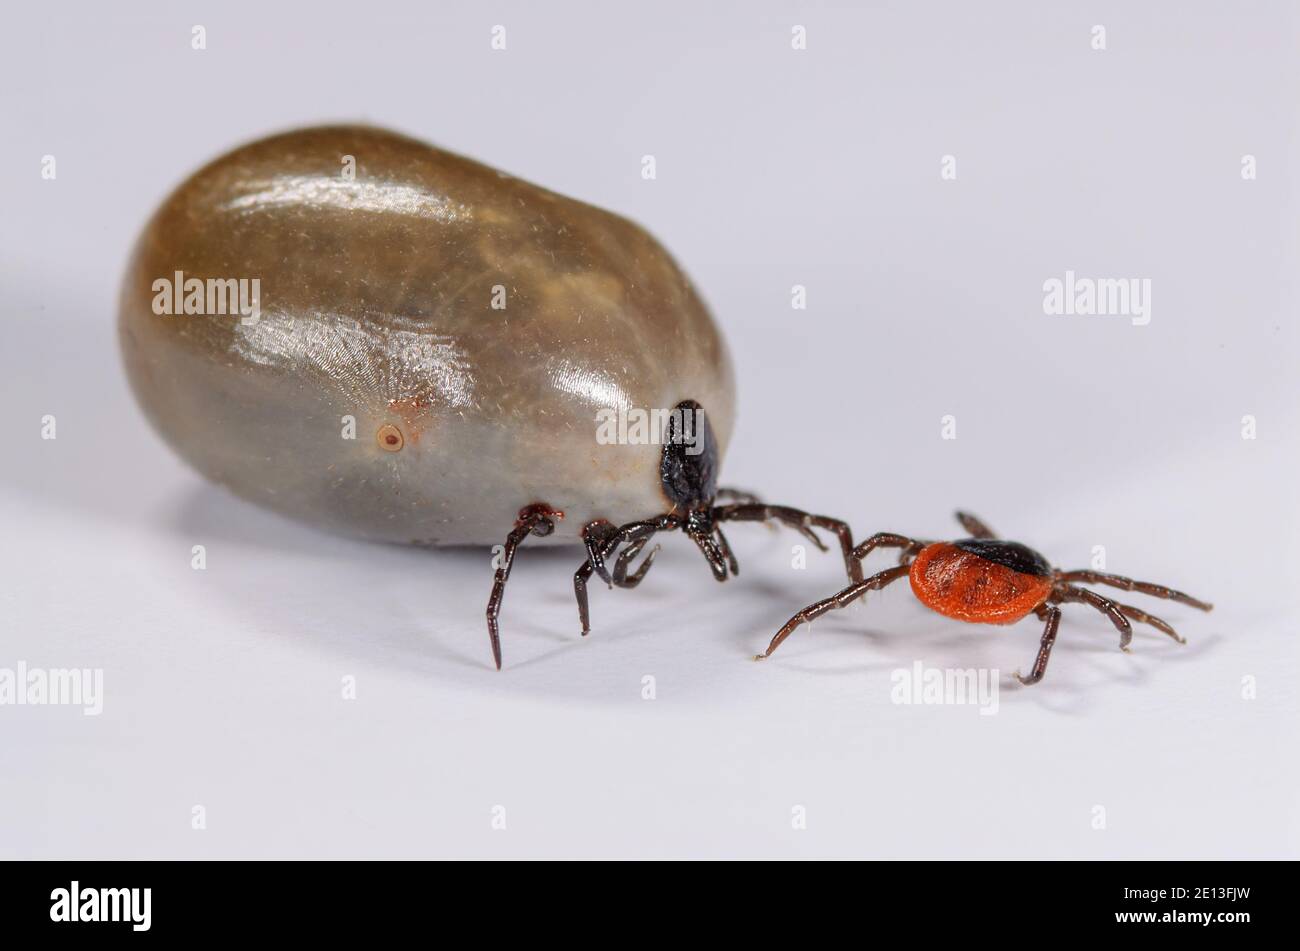 Tick before and after blood meal Stock Photo